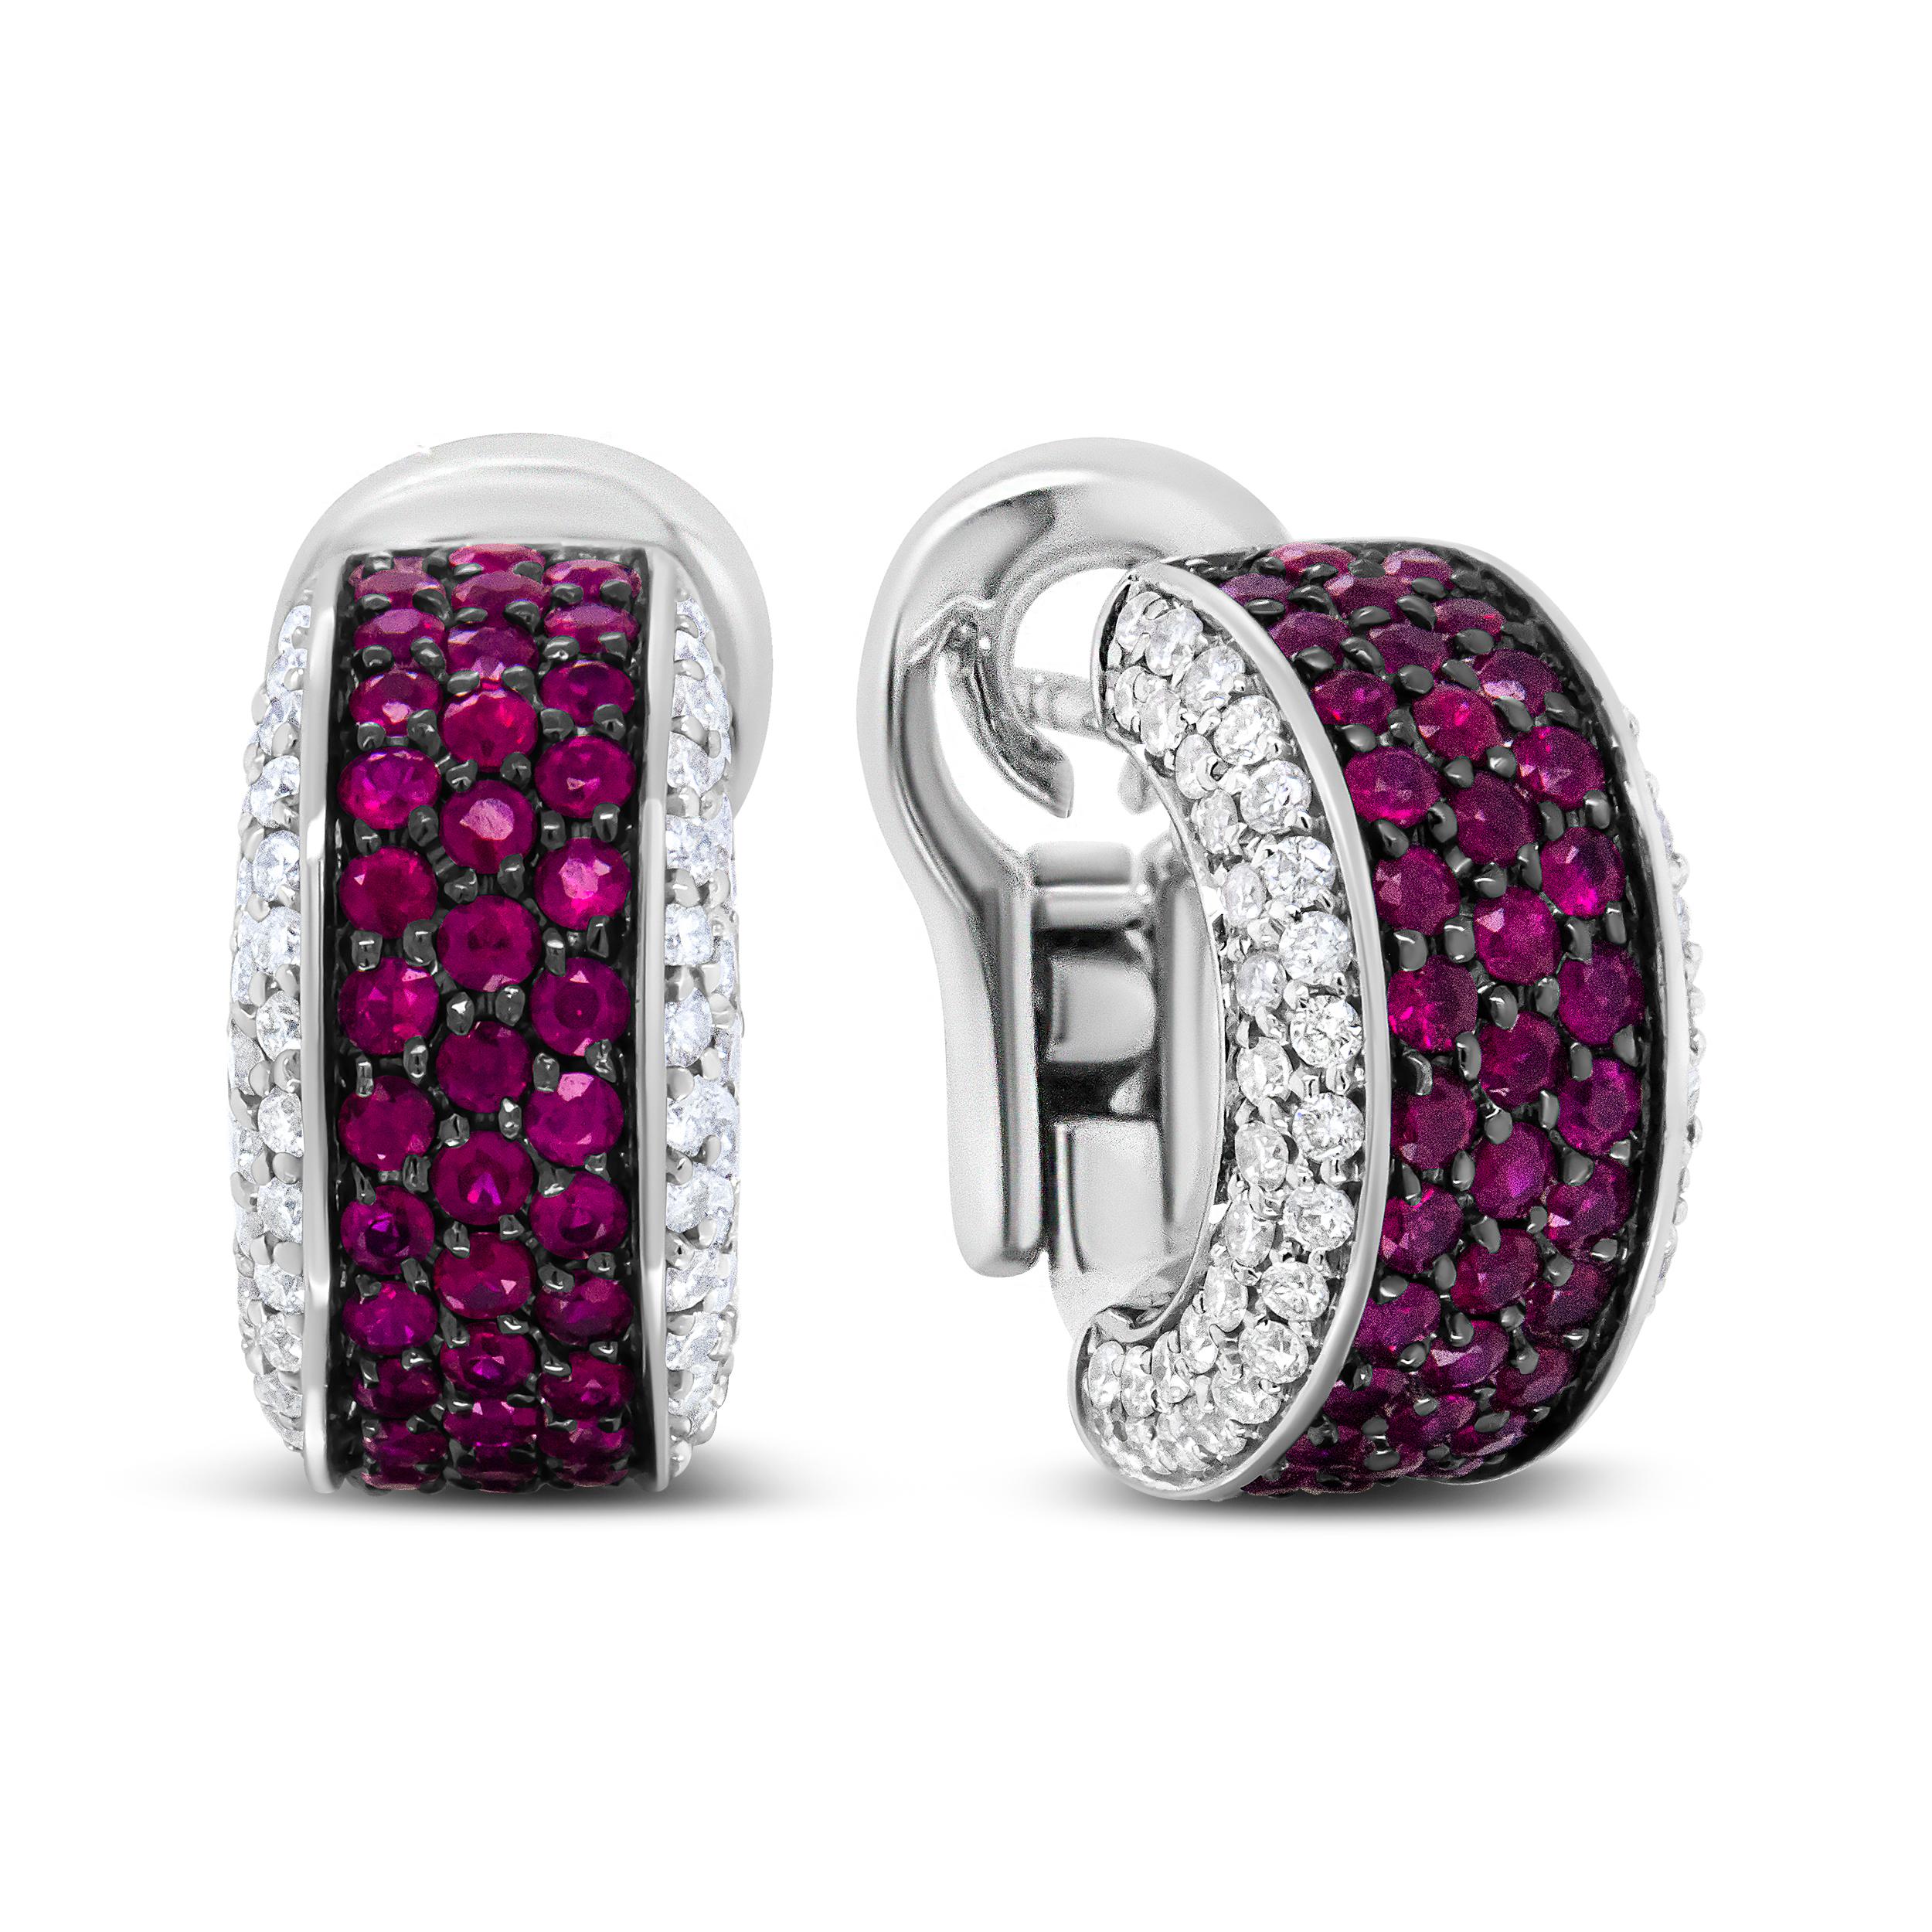 These huggie earrings provide stunning sparkle in the form of round white diamonds in prong settings and bring about a dazzling depth of color thanks to rows of brilliant-cut 1mm round natural red rubies. The diamonds that flank these deep red